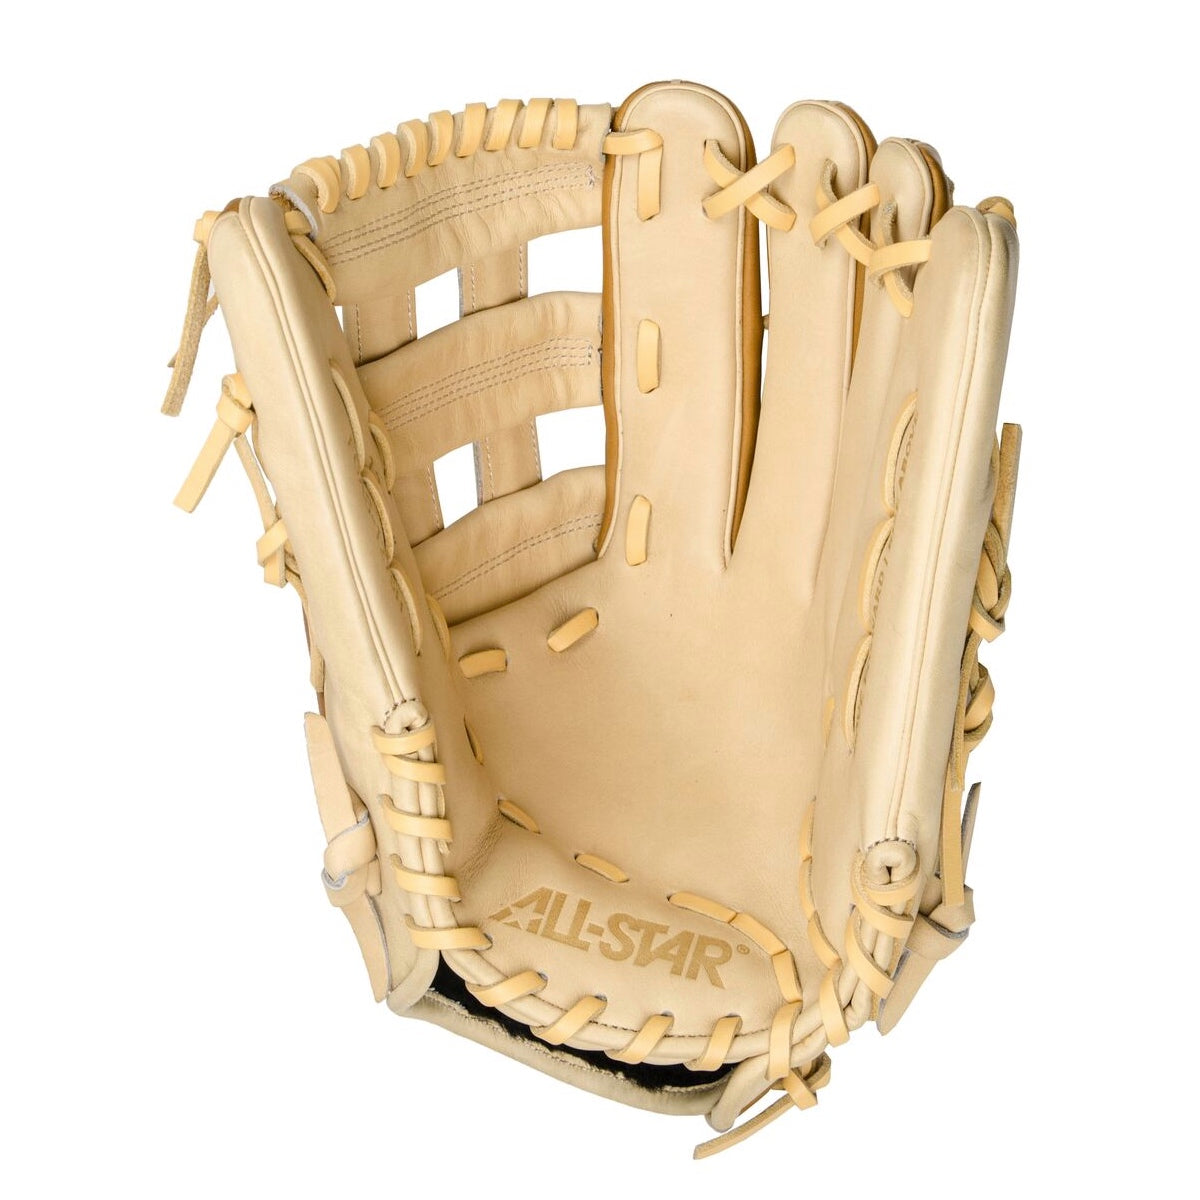 all-star-pro-elite-fgas-1275h-outfield-glove